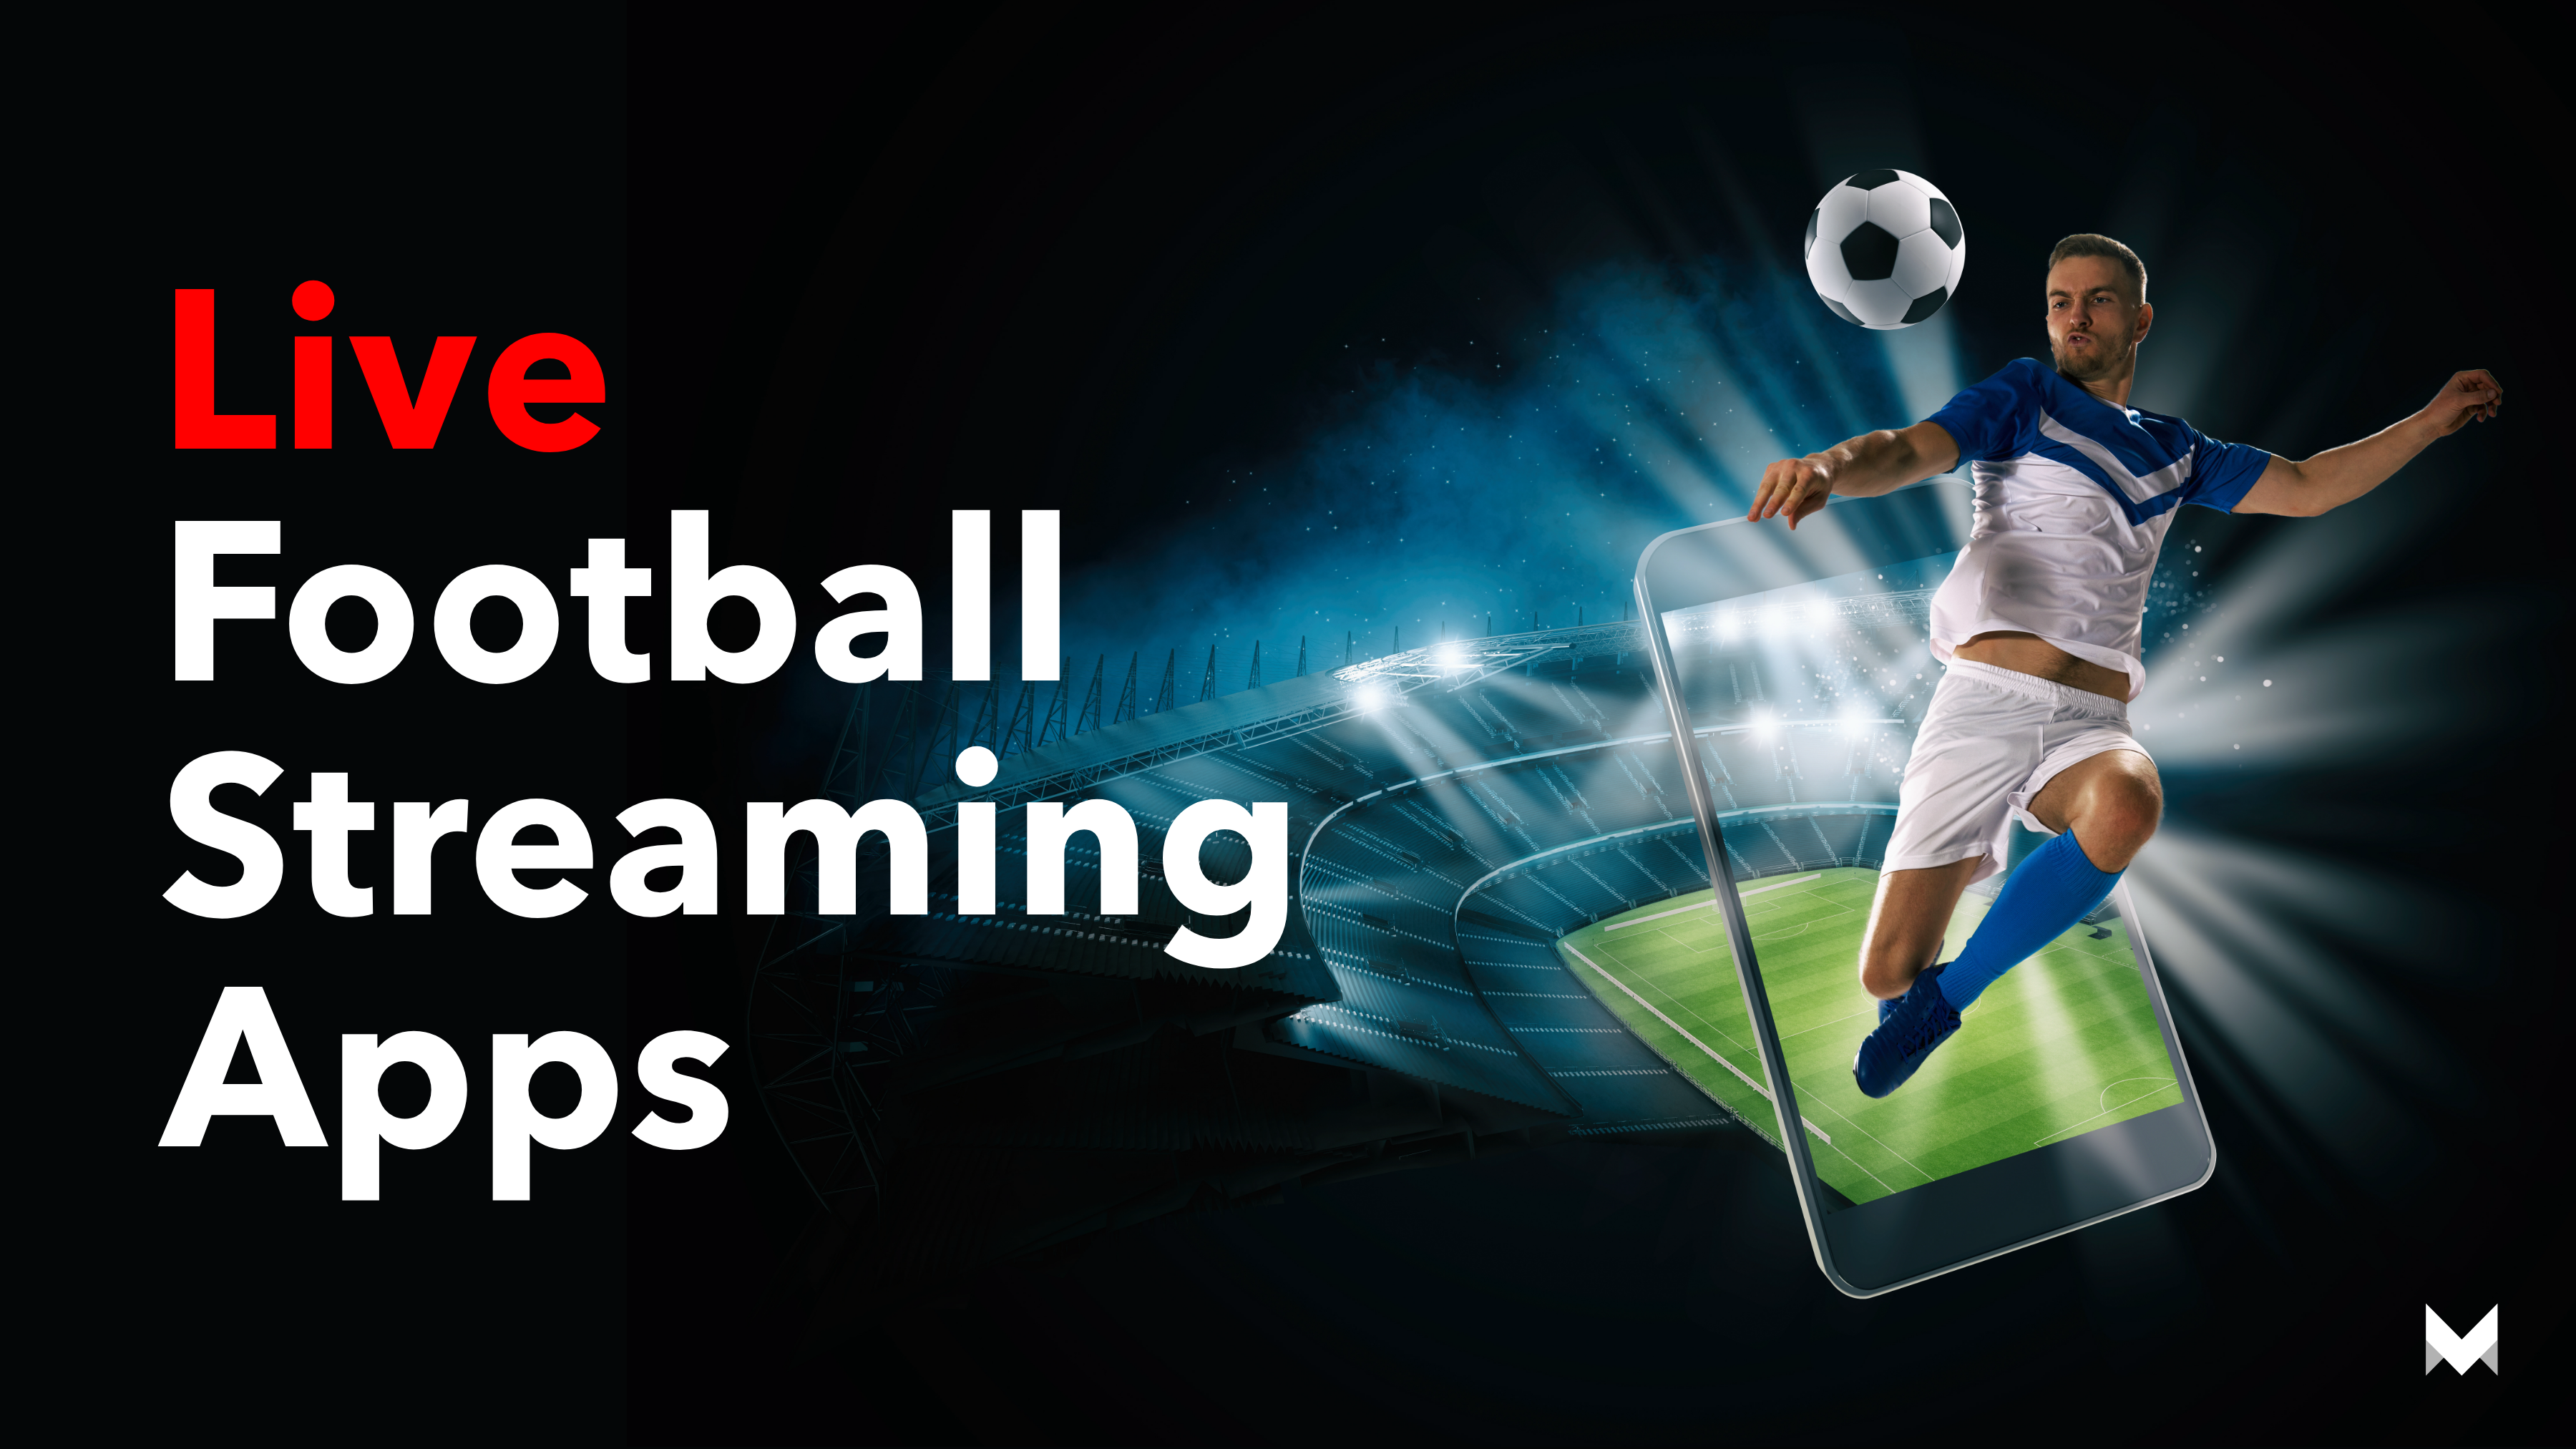 Live Football Streaming Apps